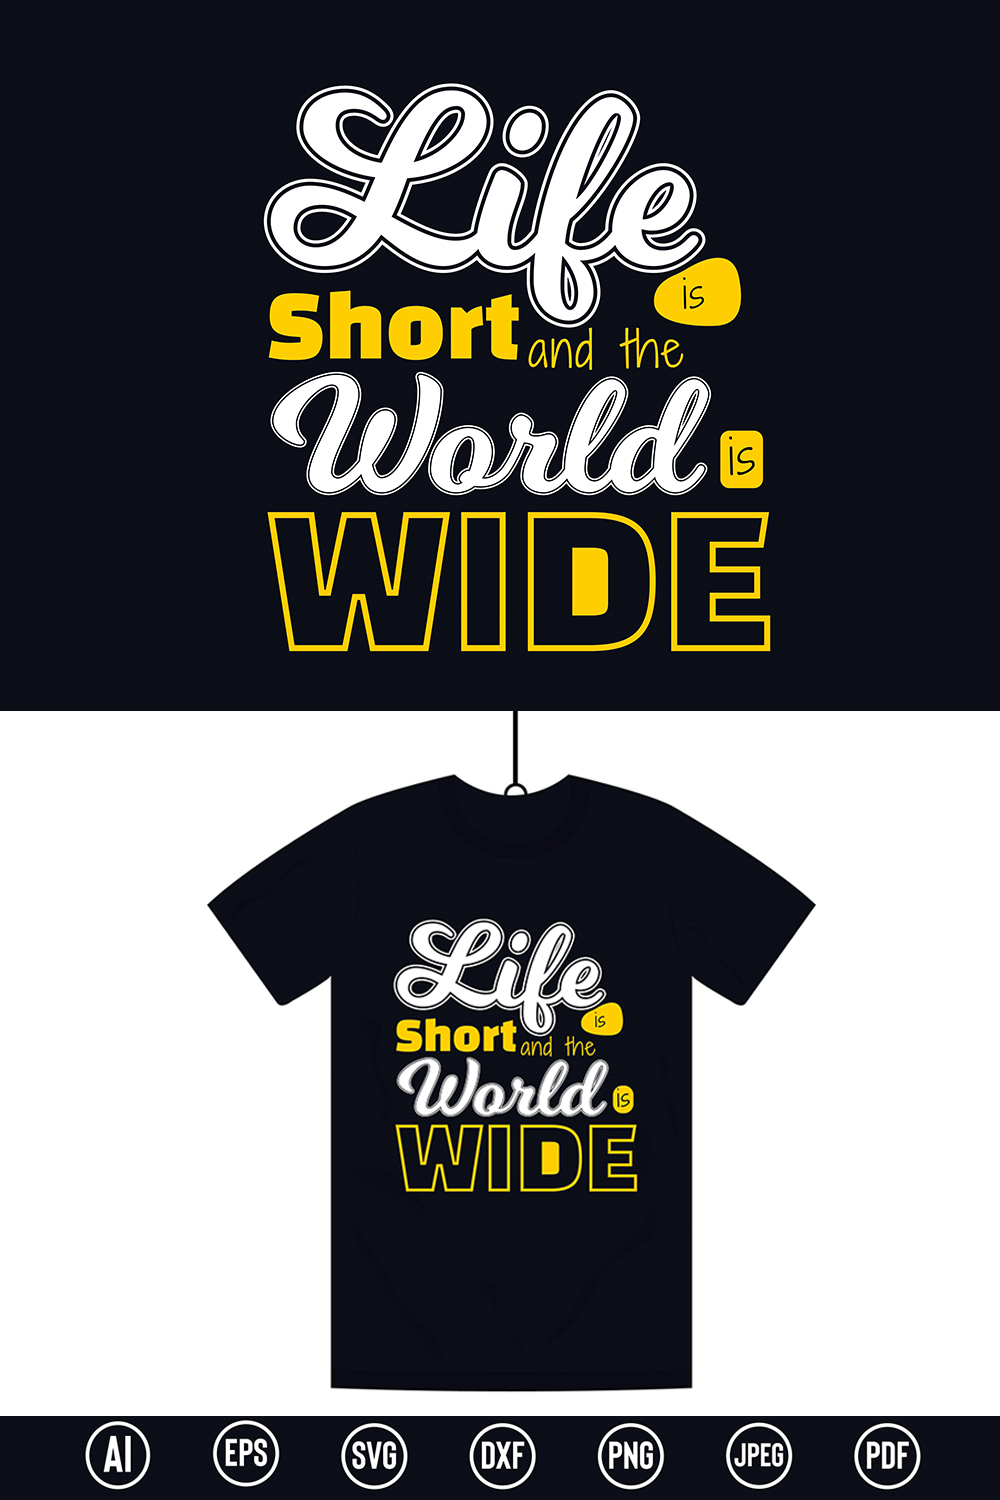 Motivational traveler Typography T-Shirt design with “Life is short and the world is wide” quote for t-shirt, posters, stickers, mug prints, banners, gift cards, labels etc pinterest preview image.